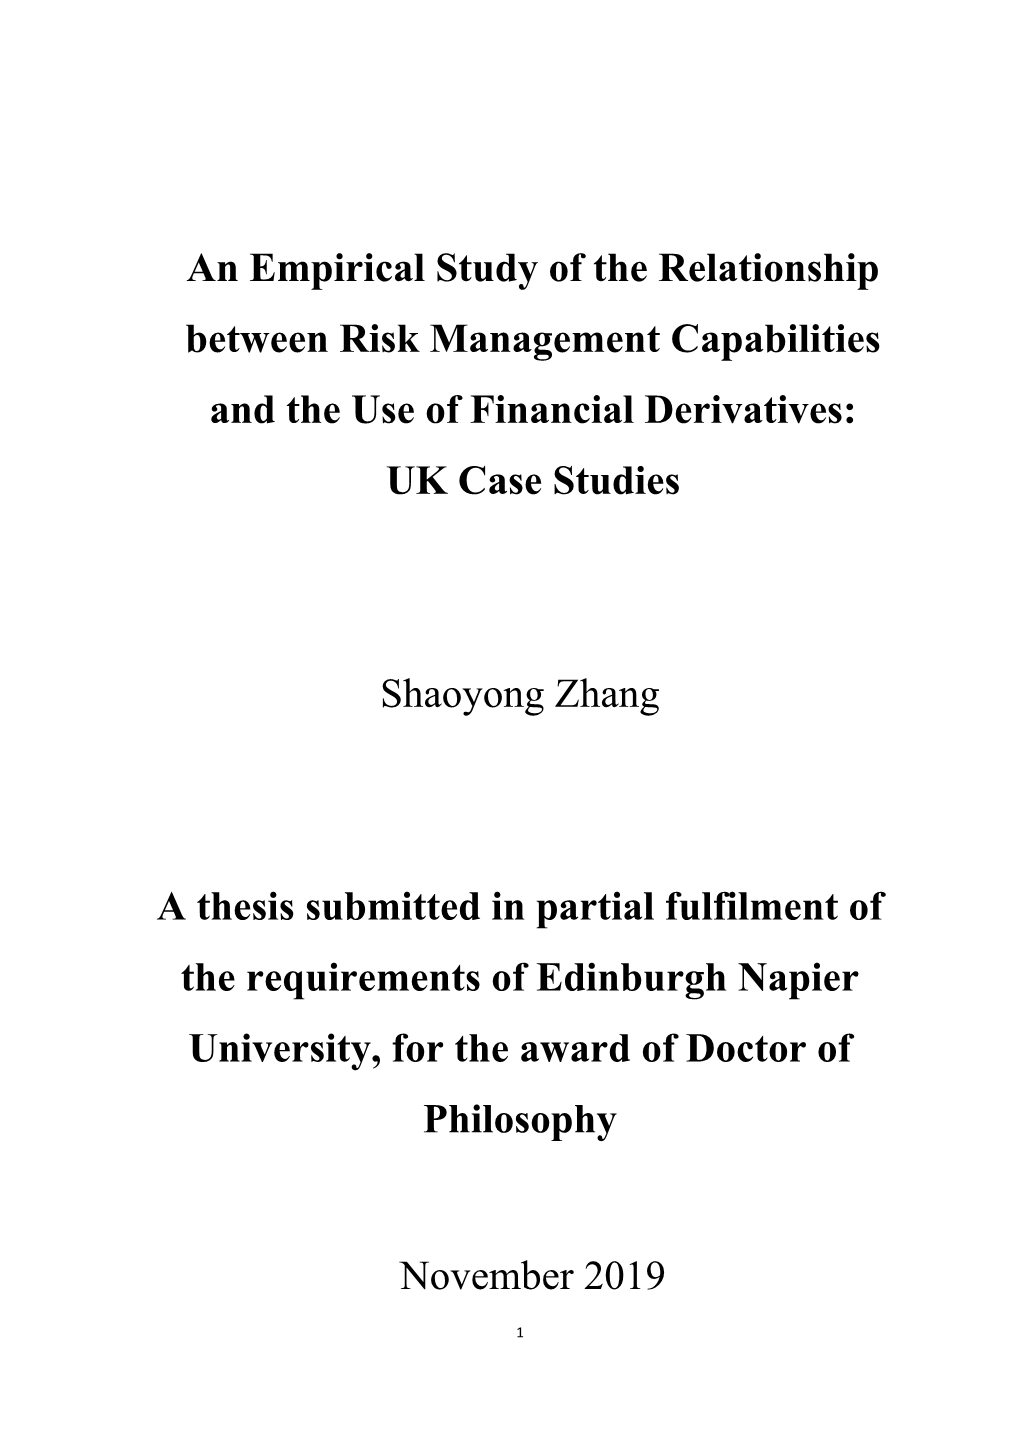 An Empirical Study of the Relationship Between Risk Management Capabilities and the Use of Financial Derivatives: UK Case Studies